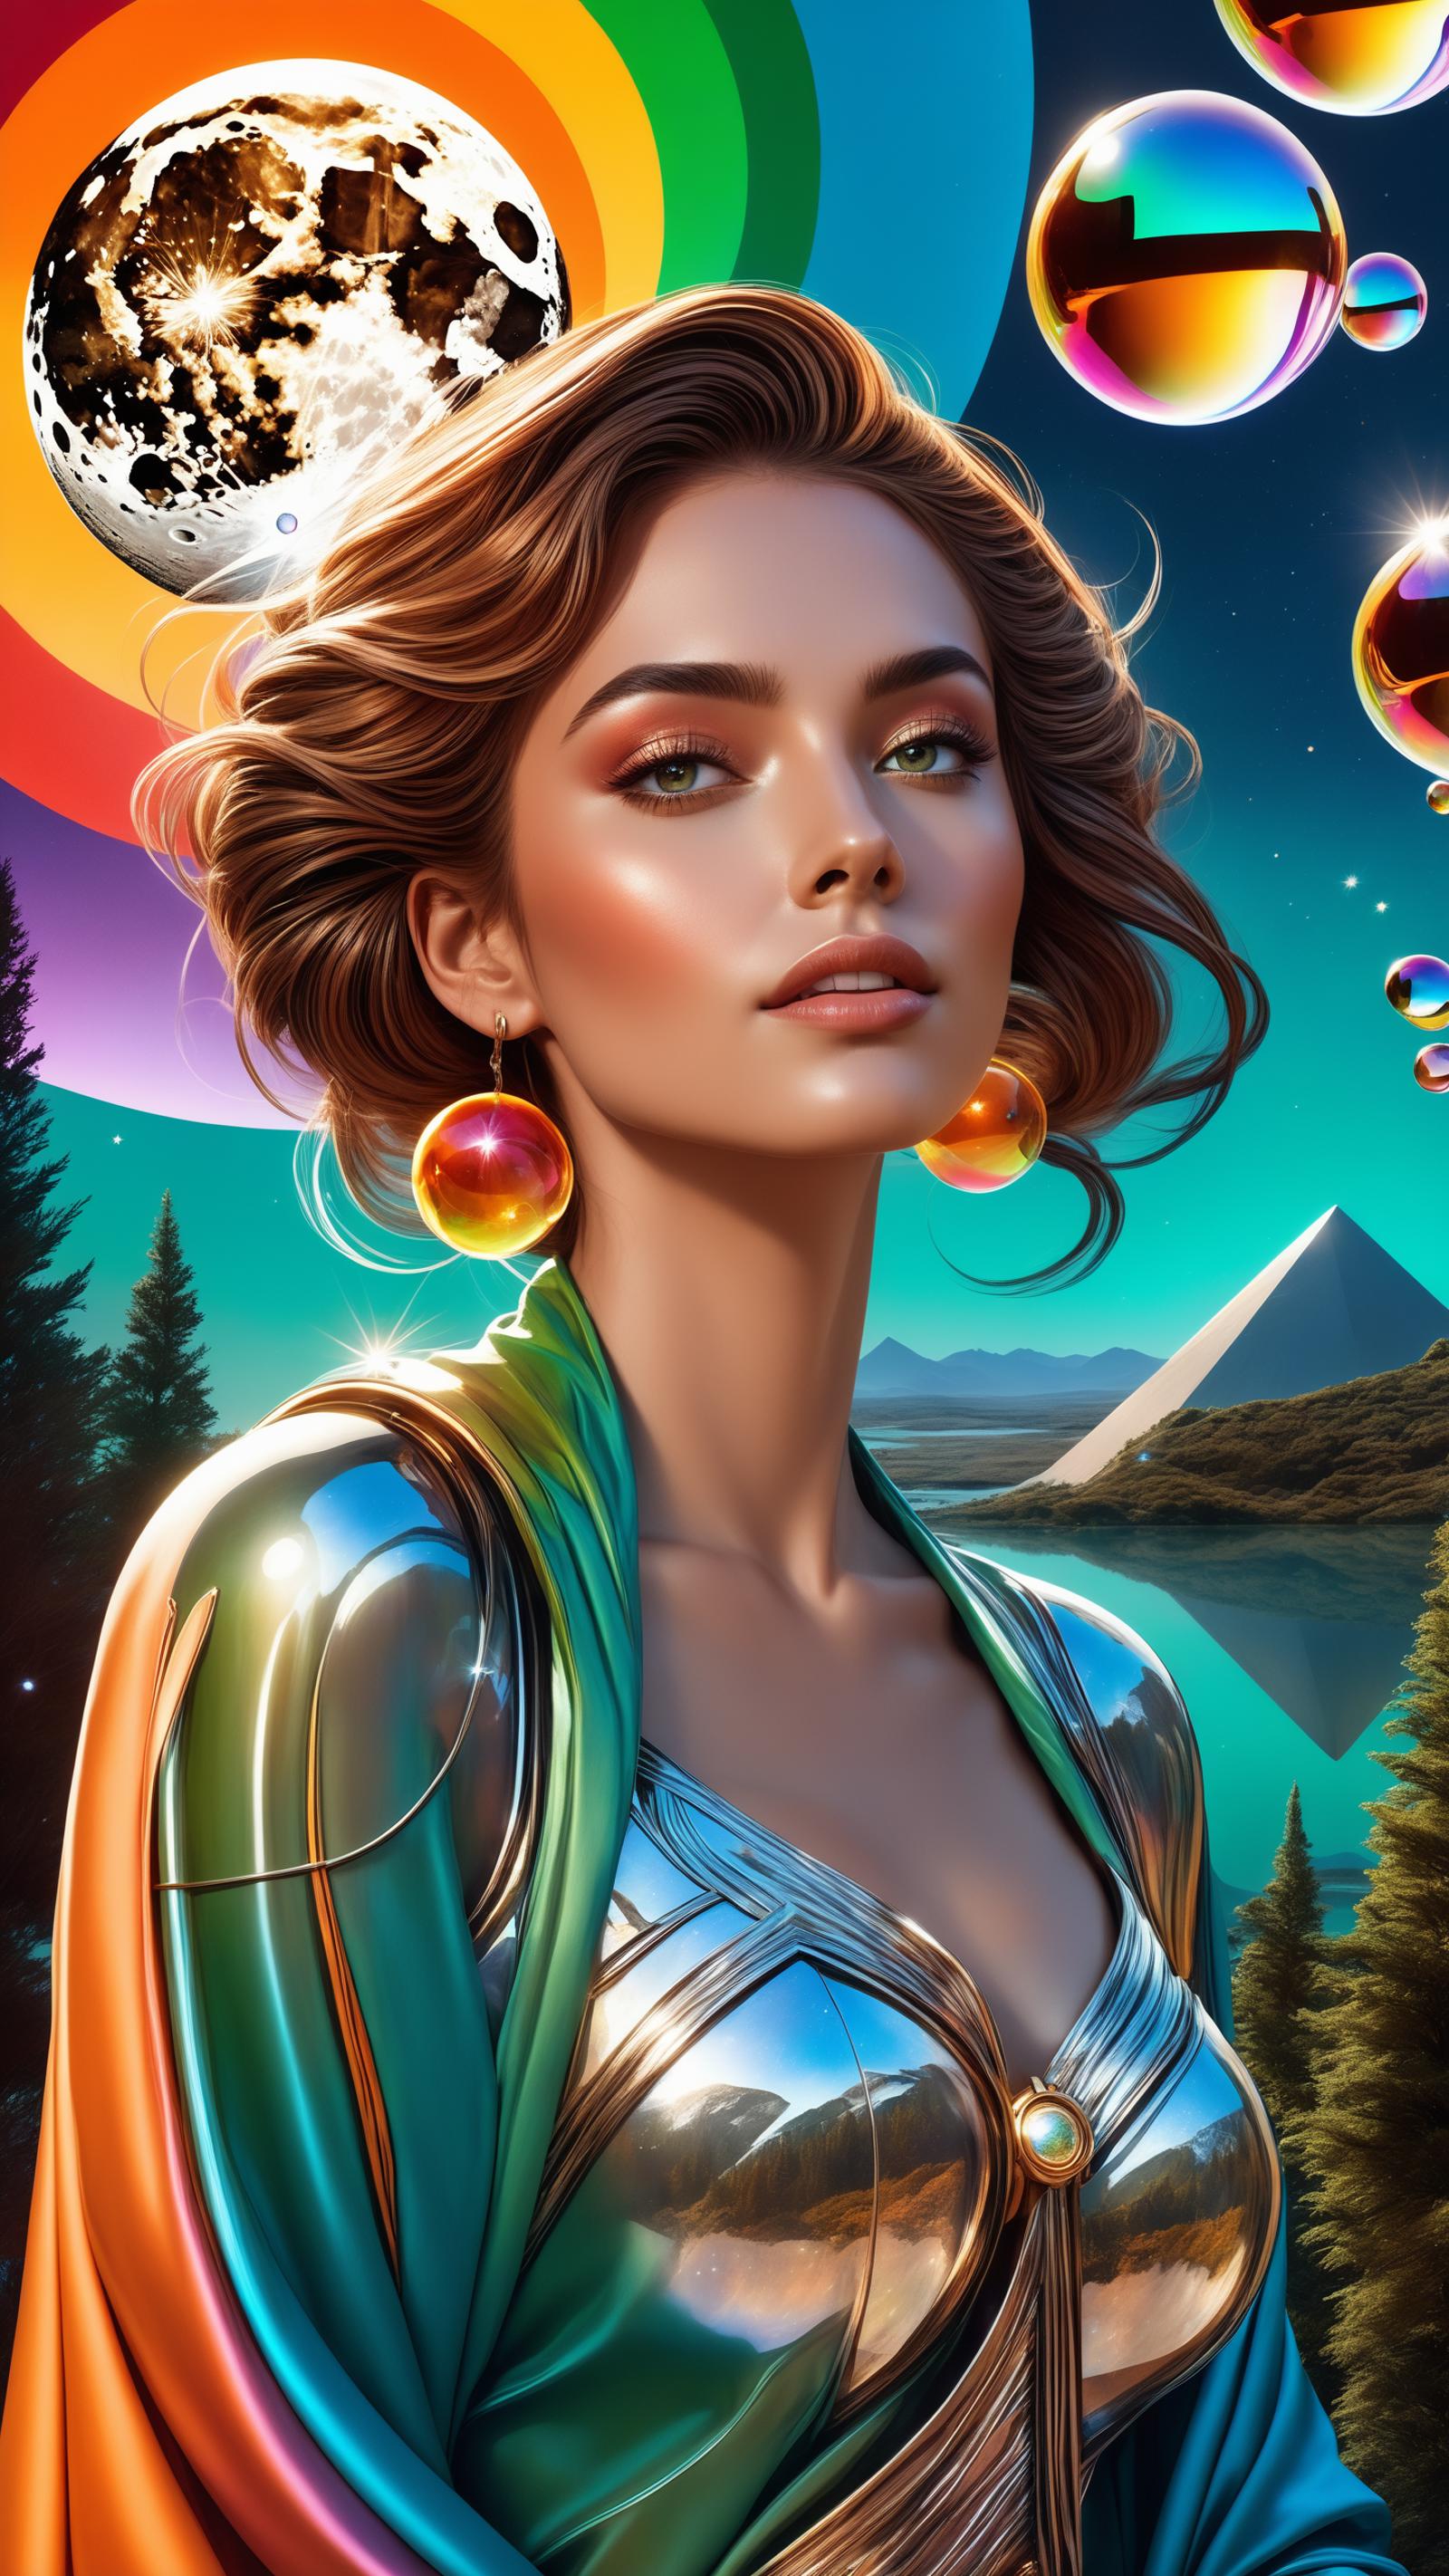 Artistic Illustration of a Woman with Colorful Earrings and a Green Scarf, Set Against a Backdrop of Rainbow Colors